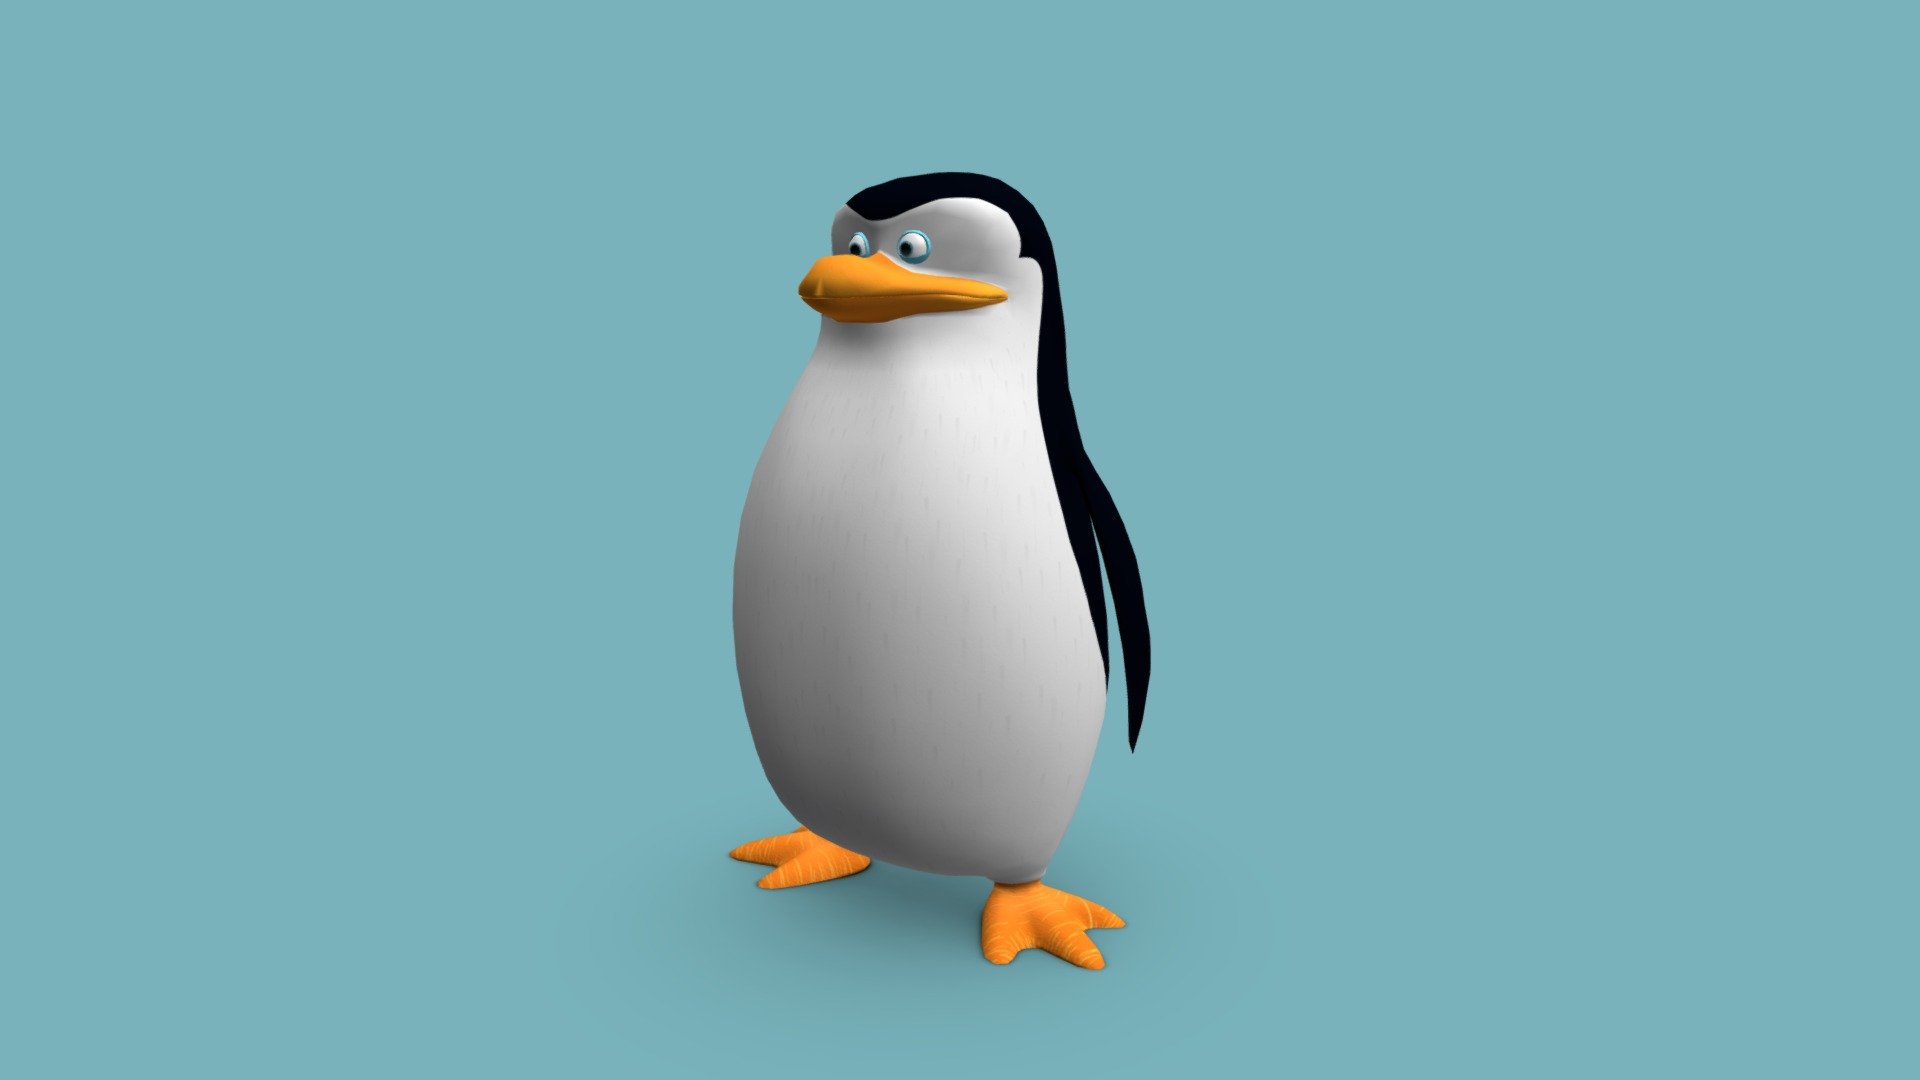 Skipper from The Penguins of Madagascar